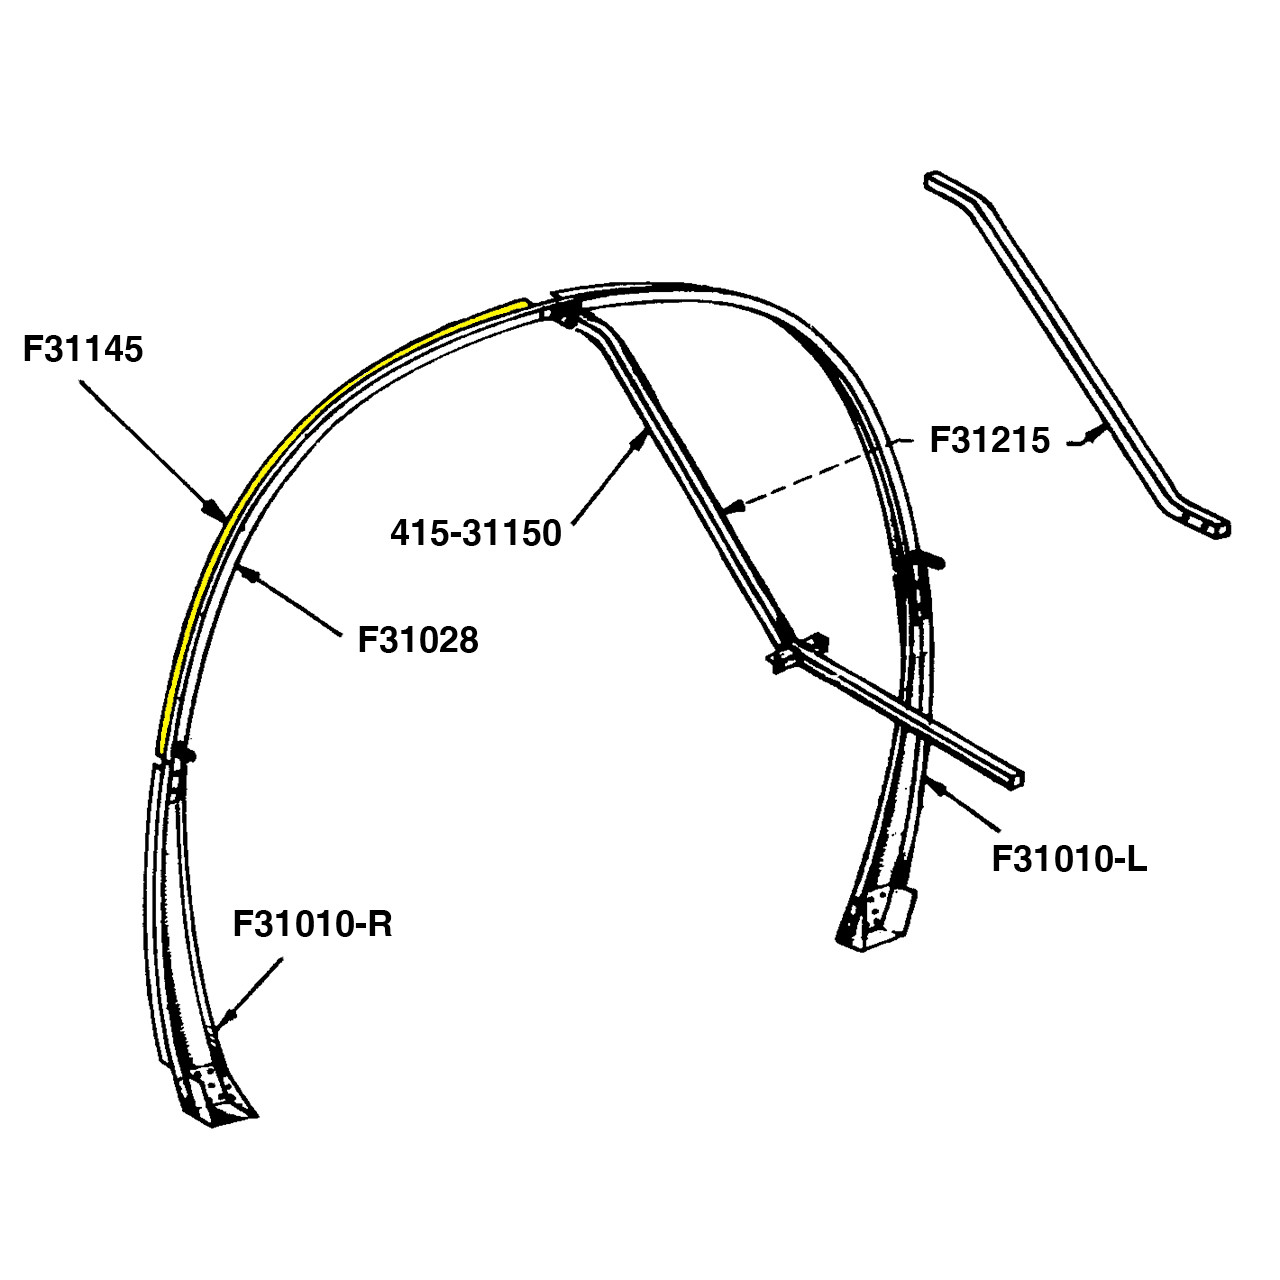 F31145   ERCOUPE FRAME C CHANNEL